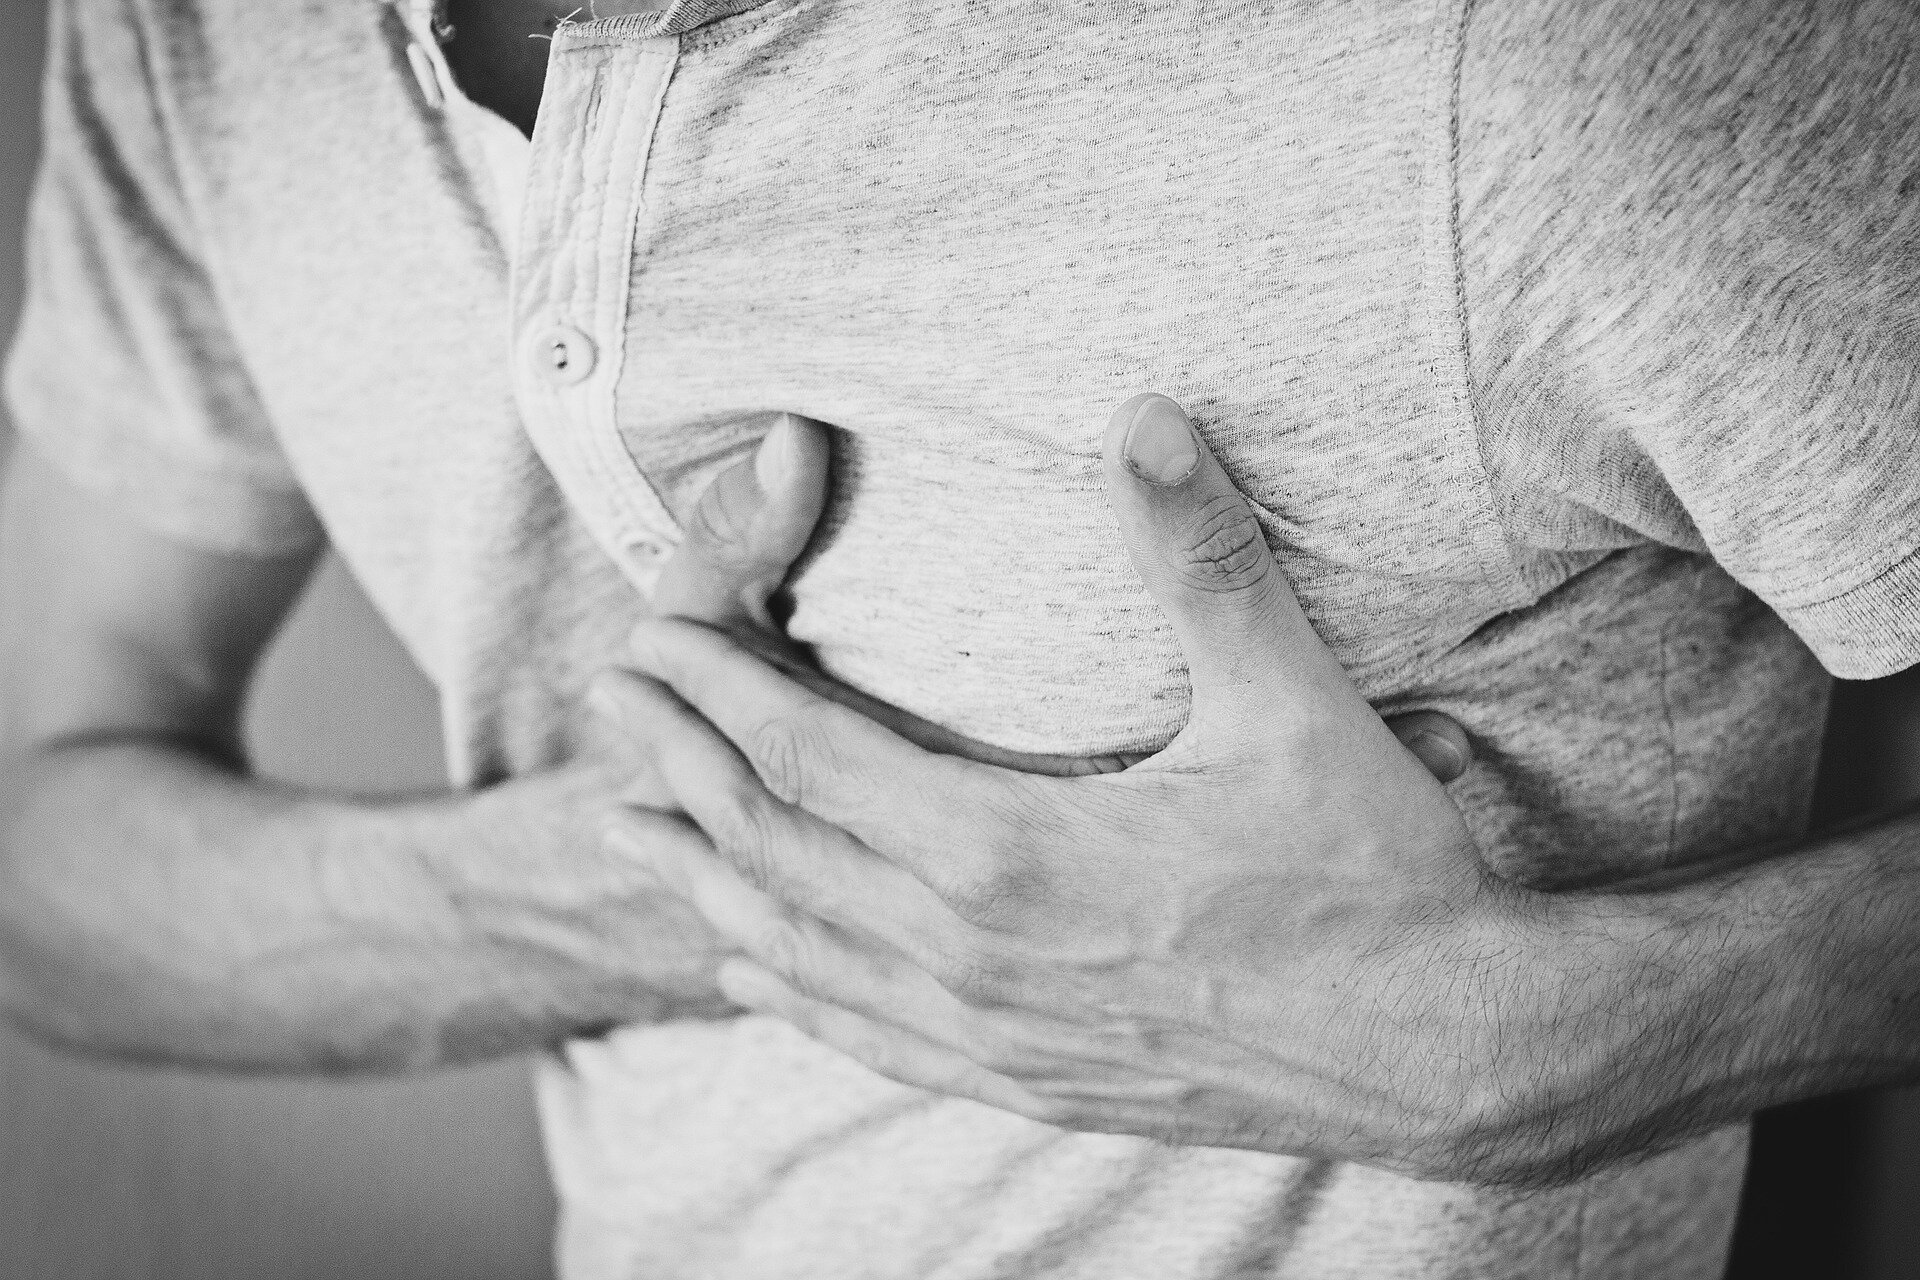 Socioeconomic factors found to adversely affect most heart failure patients